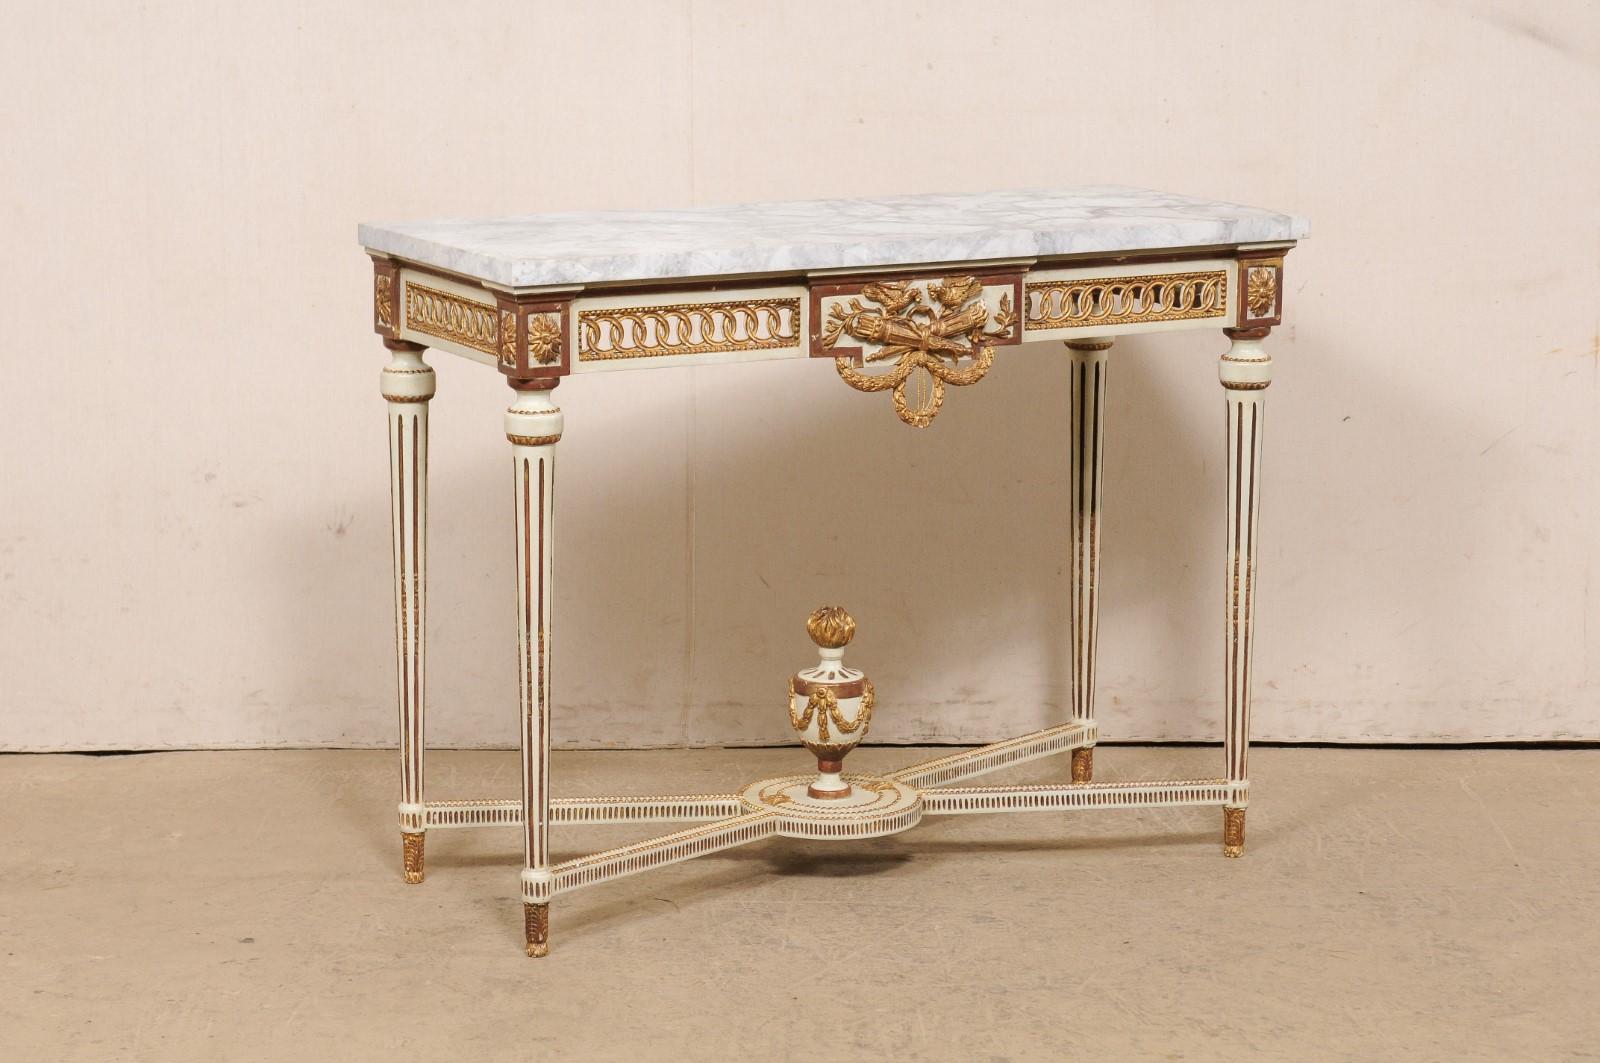 An Italian marble top console table, with urn finial accent at underside, from the Mid-20th Century (circa 1930s-1950s). This vintage table from Italy features a rectangular shaped marble top, which rests upon an exquisitely pierce-carved apron in a